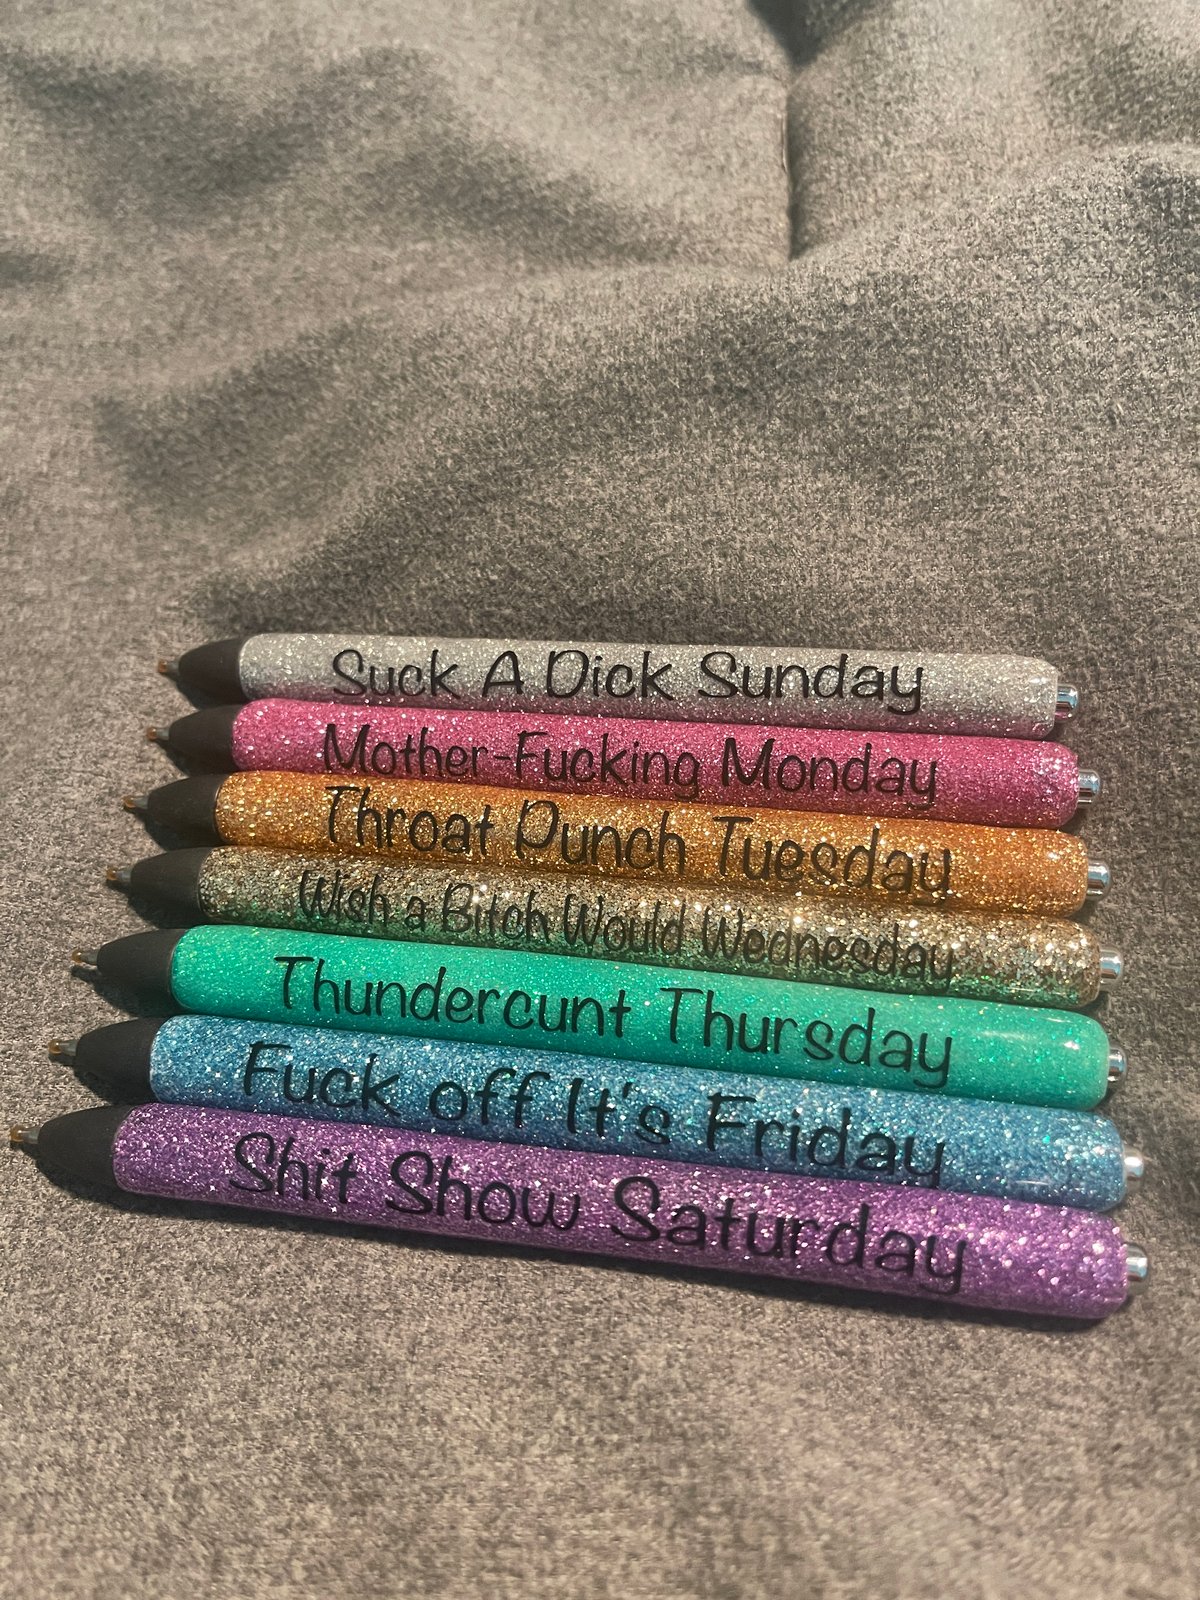 Glittery Day of the Week Pens with Adult Sayings - Fun and Functional  Stationery